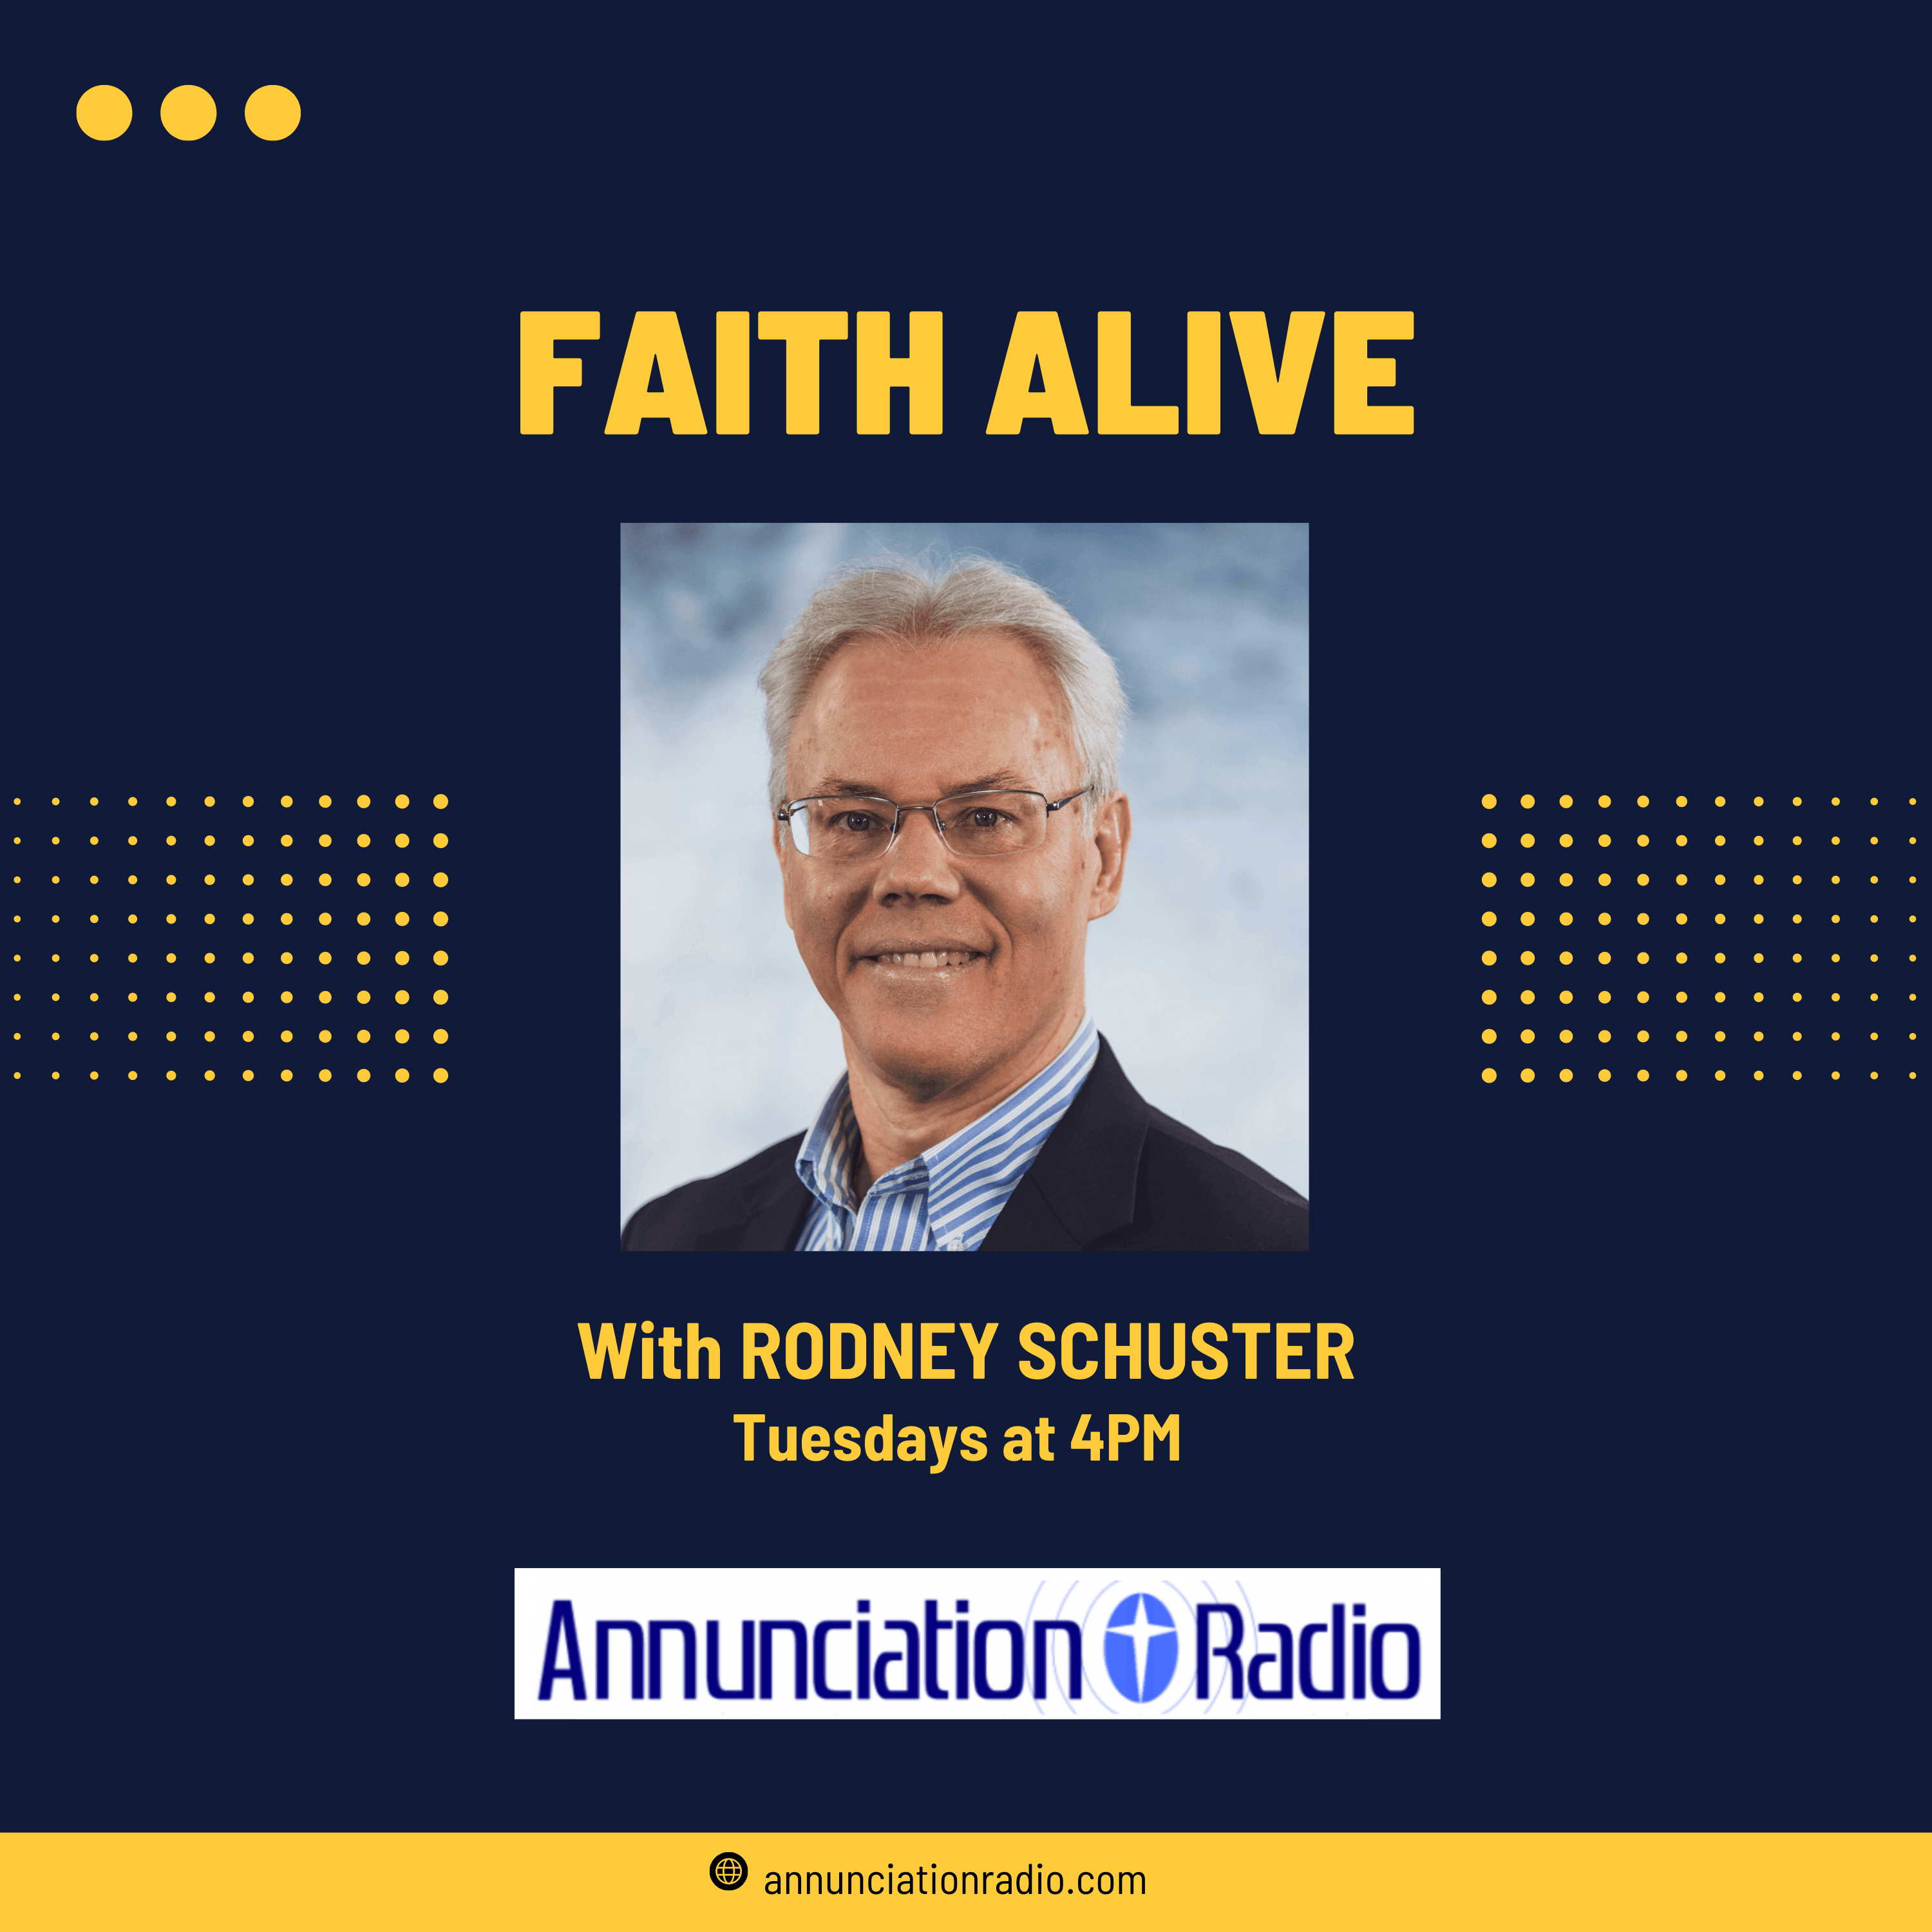 Catholic Charities hour-long "Faith Alive" program airs weekly on Annunciation Radio on Tuesdays at 4 p.m. and is re-broadcast at 3 p.m. on Saturdays. Listen to programs on demand.